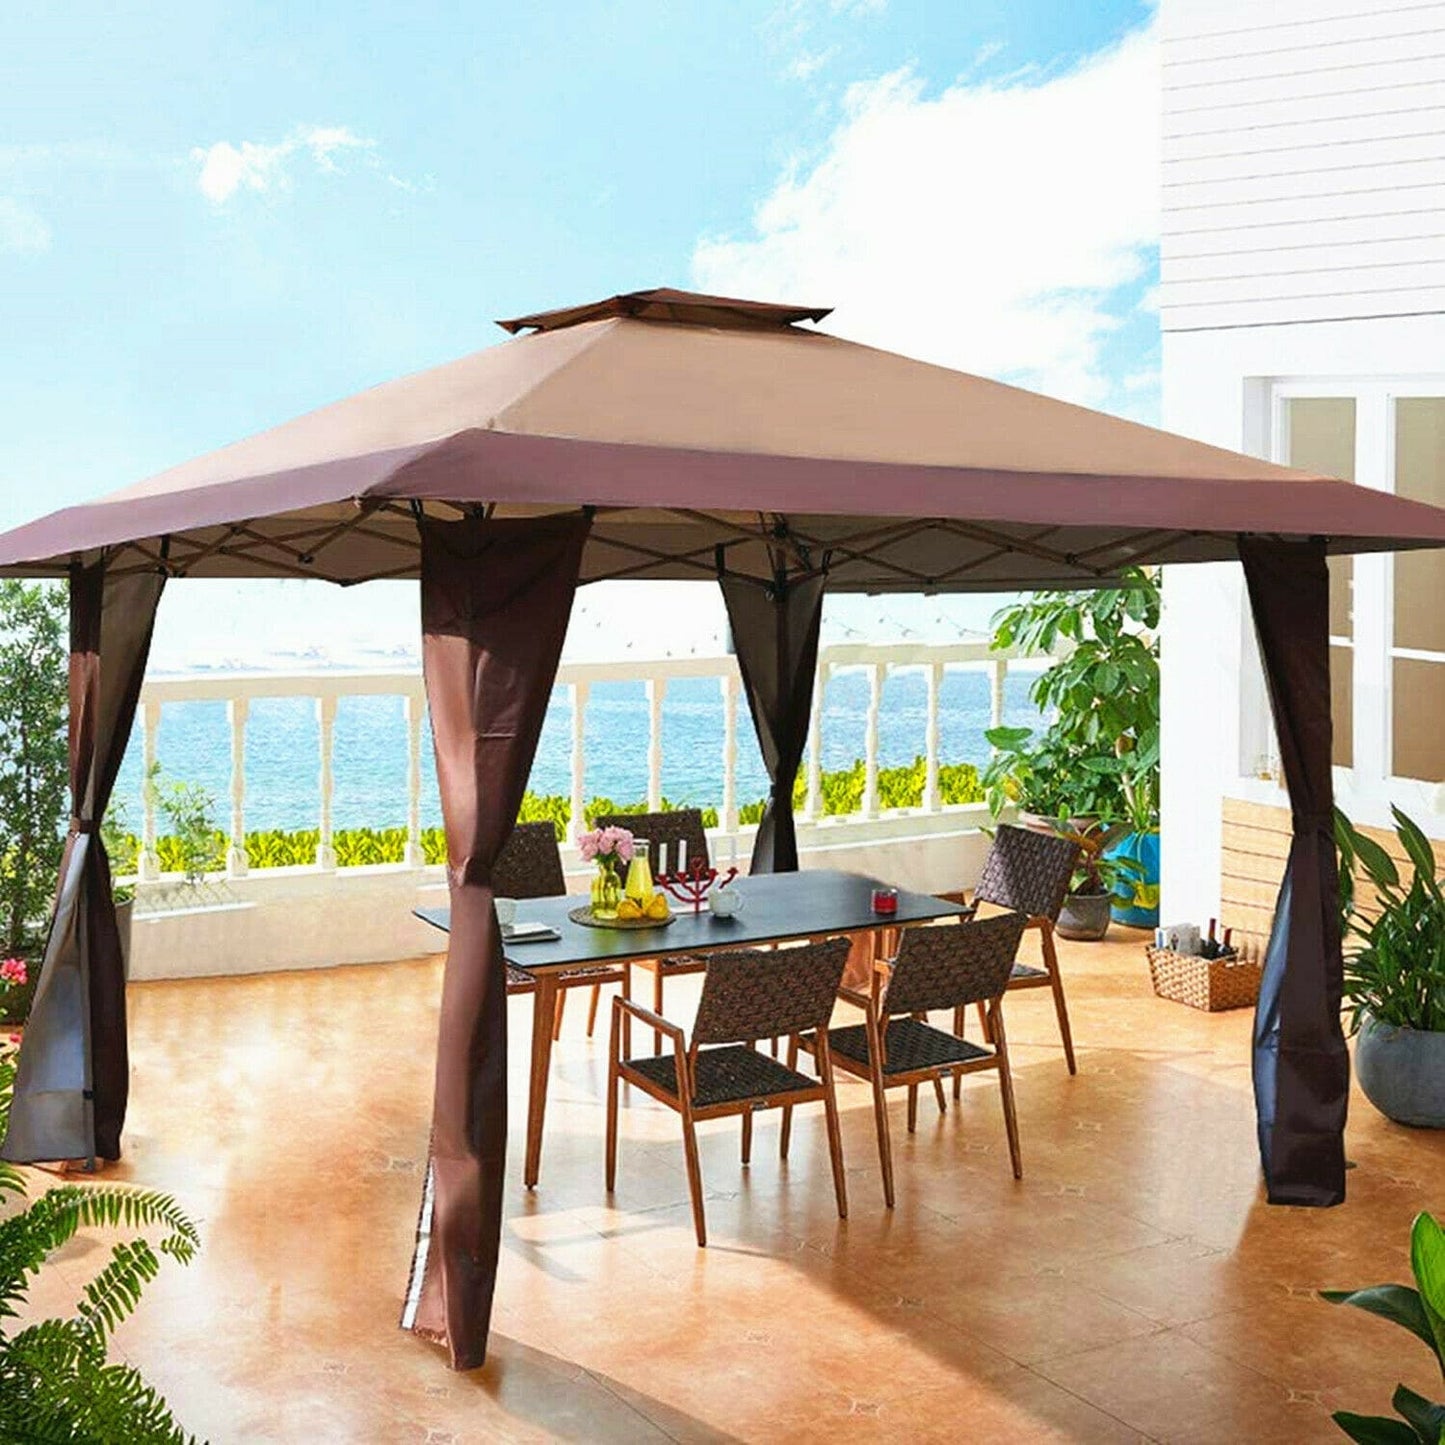 Gazebo Canopy Pop Up - 13x13 ft Outdoor Canopy Tent For Patio - Garden Party Wedding Canopy Tent